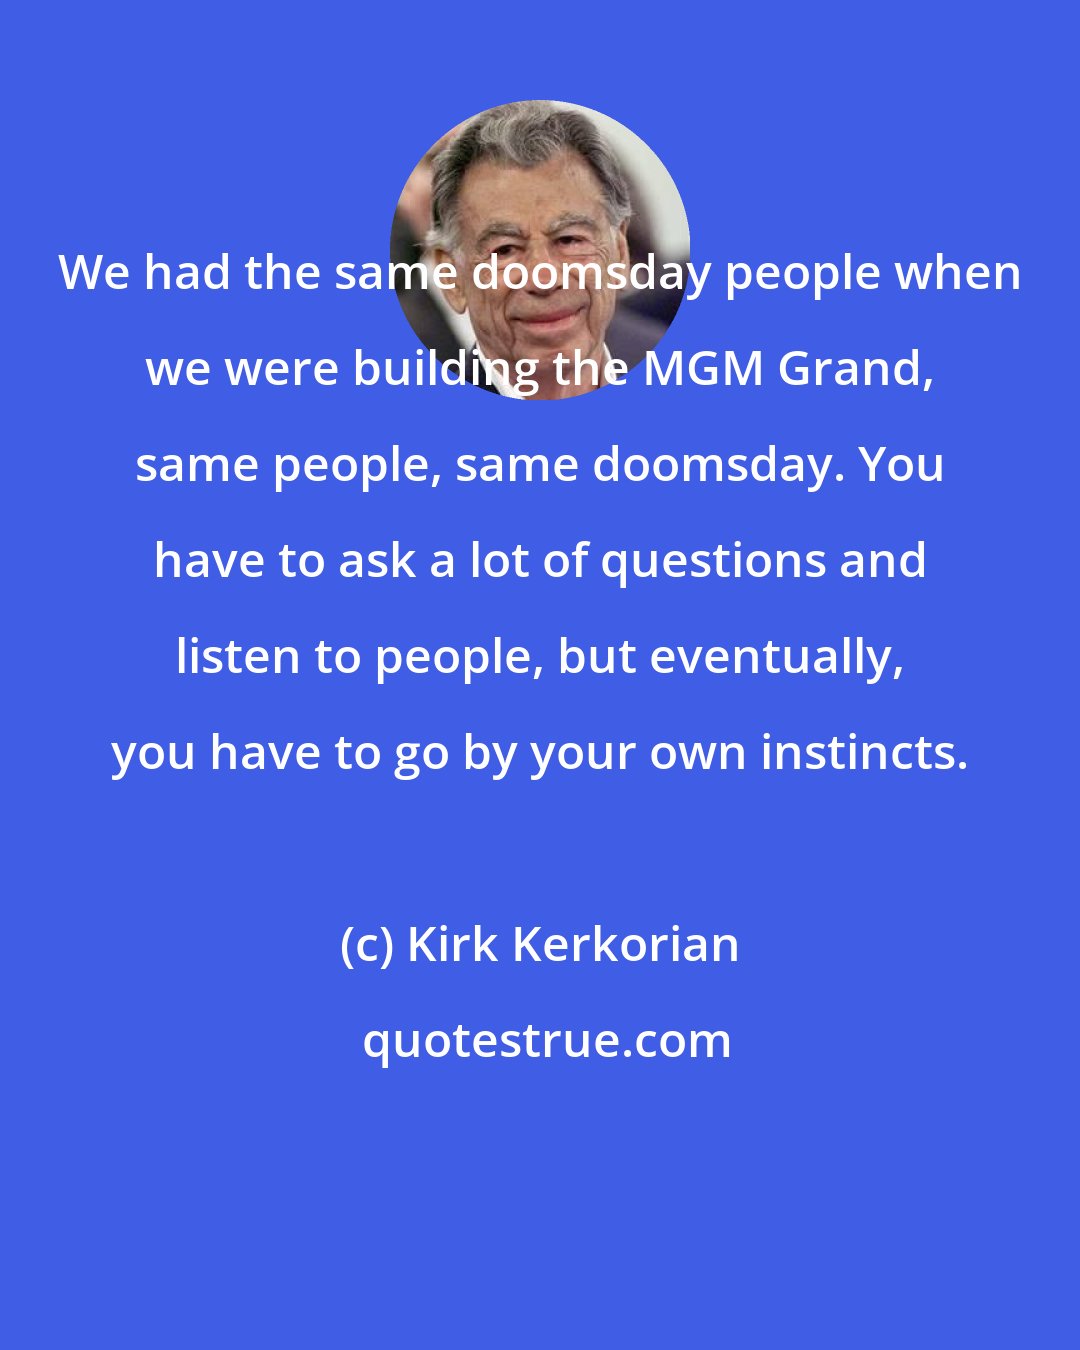 Kirk Kerkorian: We had the same doomsday people when we were building the MGM Grand, same people, same doomsday. You have to ask a lot of questions and listen to people, but eventually, you have to go by your own instincts.